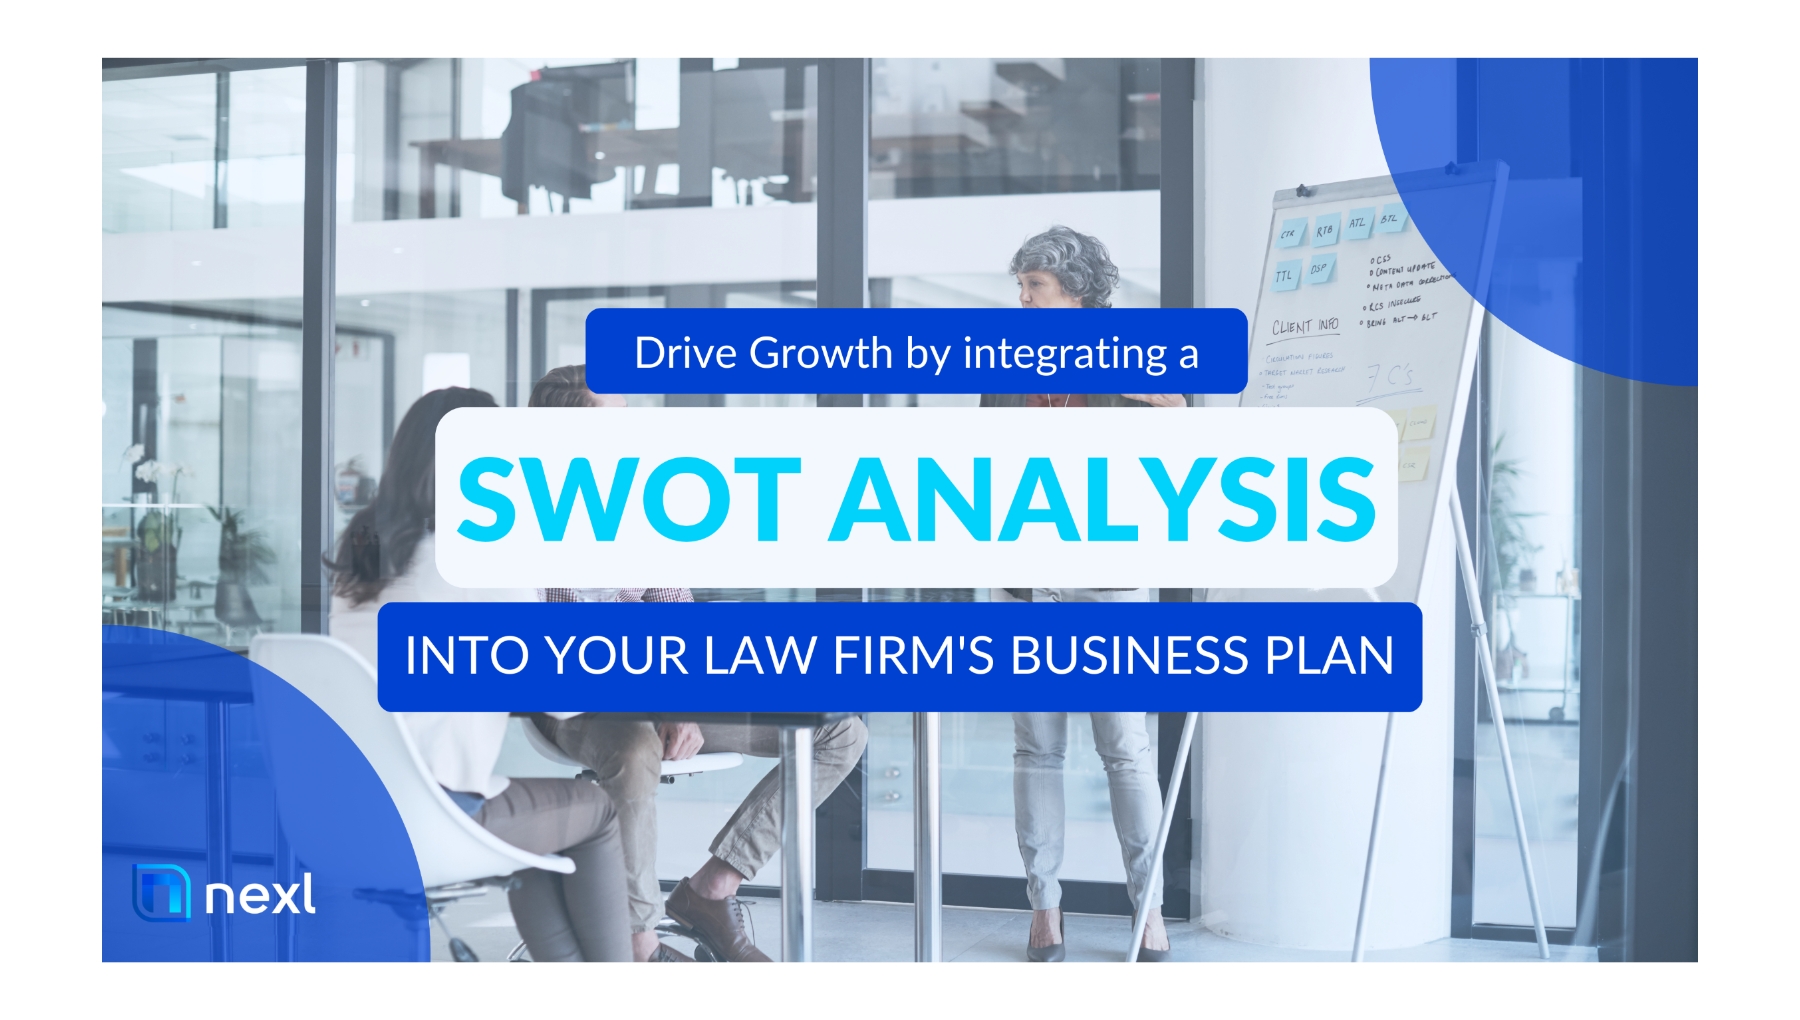 Drive Growth by Integrating a SWOT Analysis into Your Law Firm's Business Development Plan